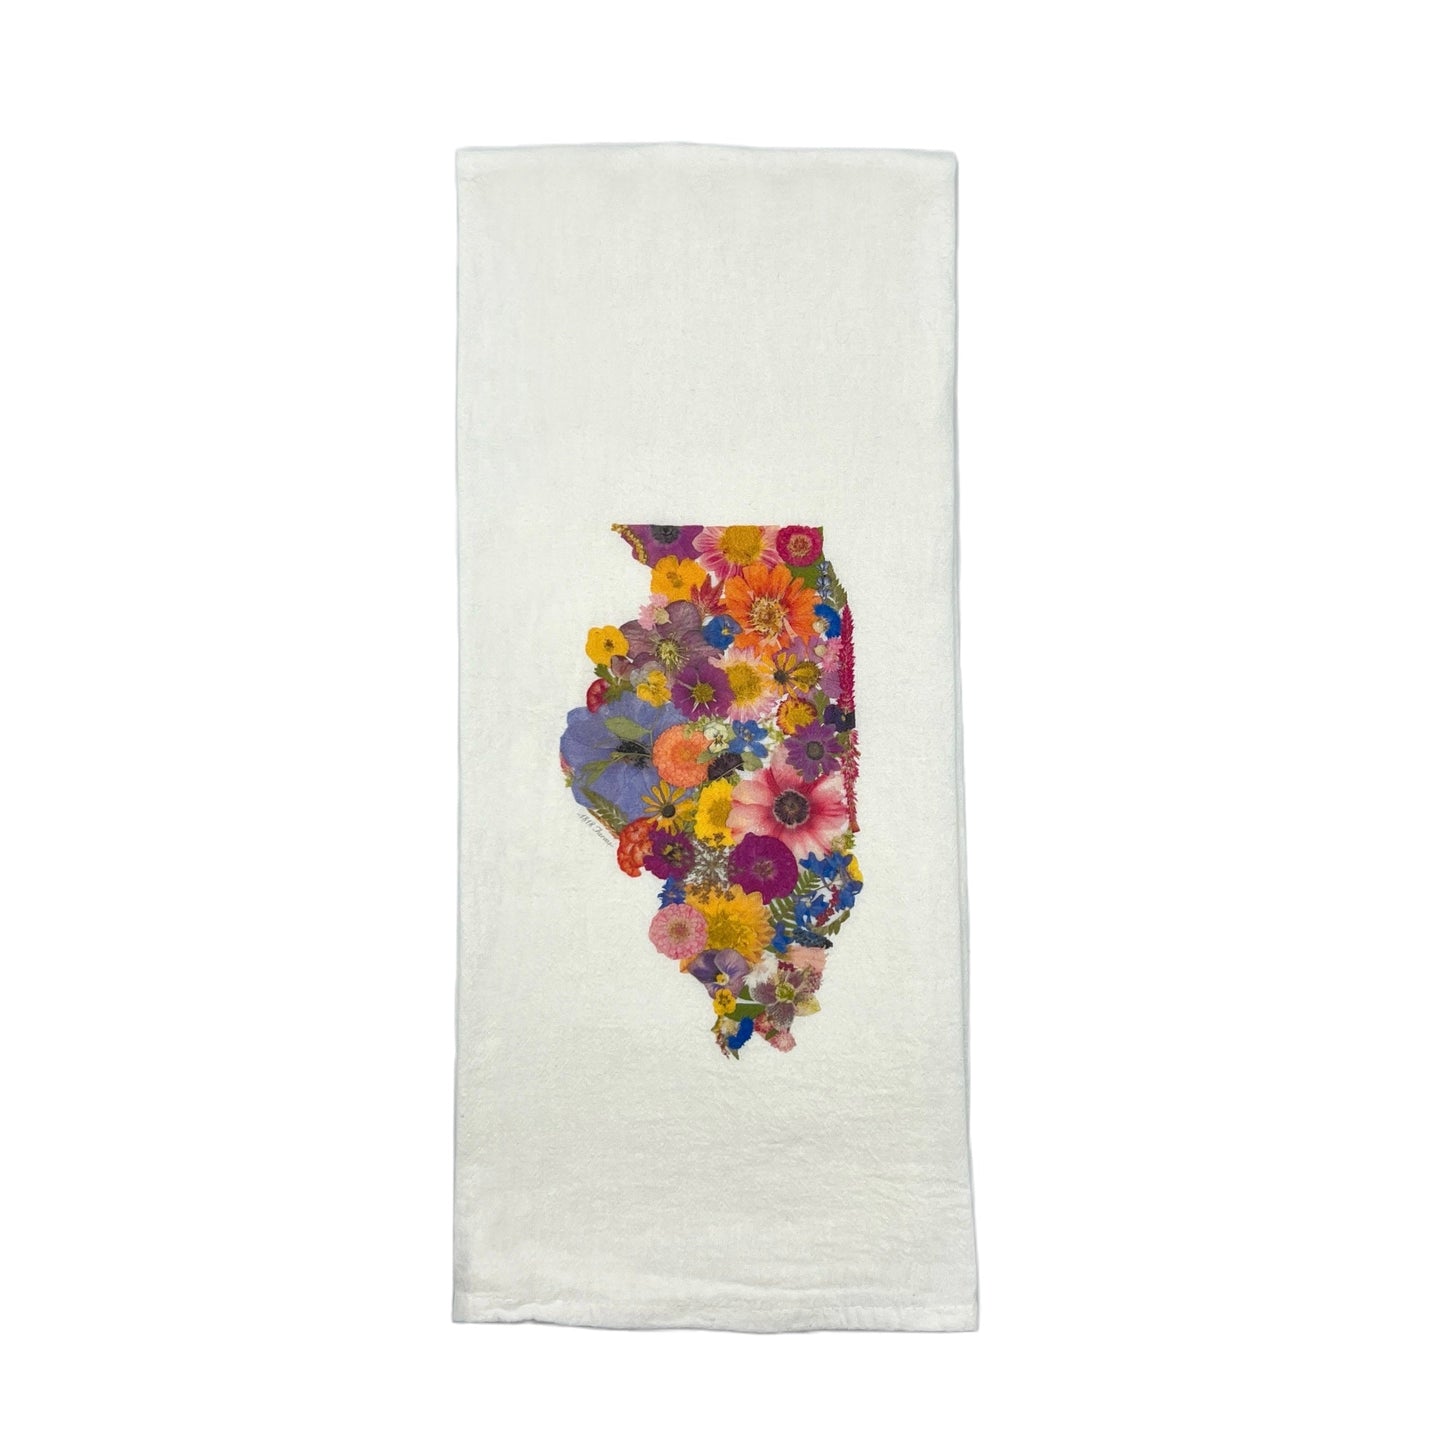 State Themed Flour Sack Towel  - "Where I Bloom" Collection Towel 1818 Farms Illinois  